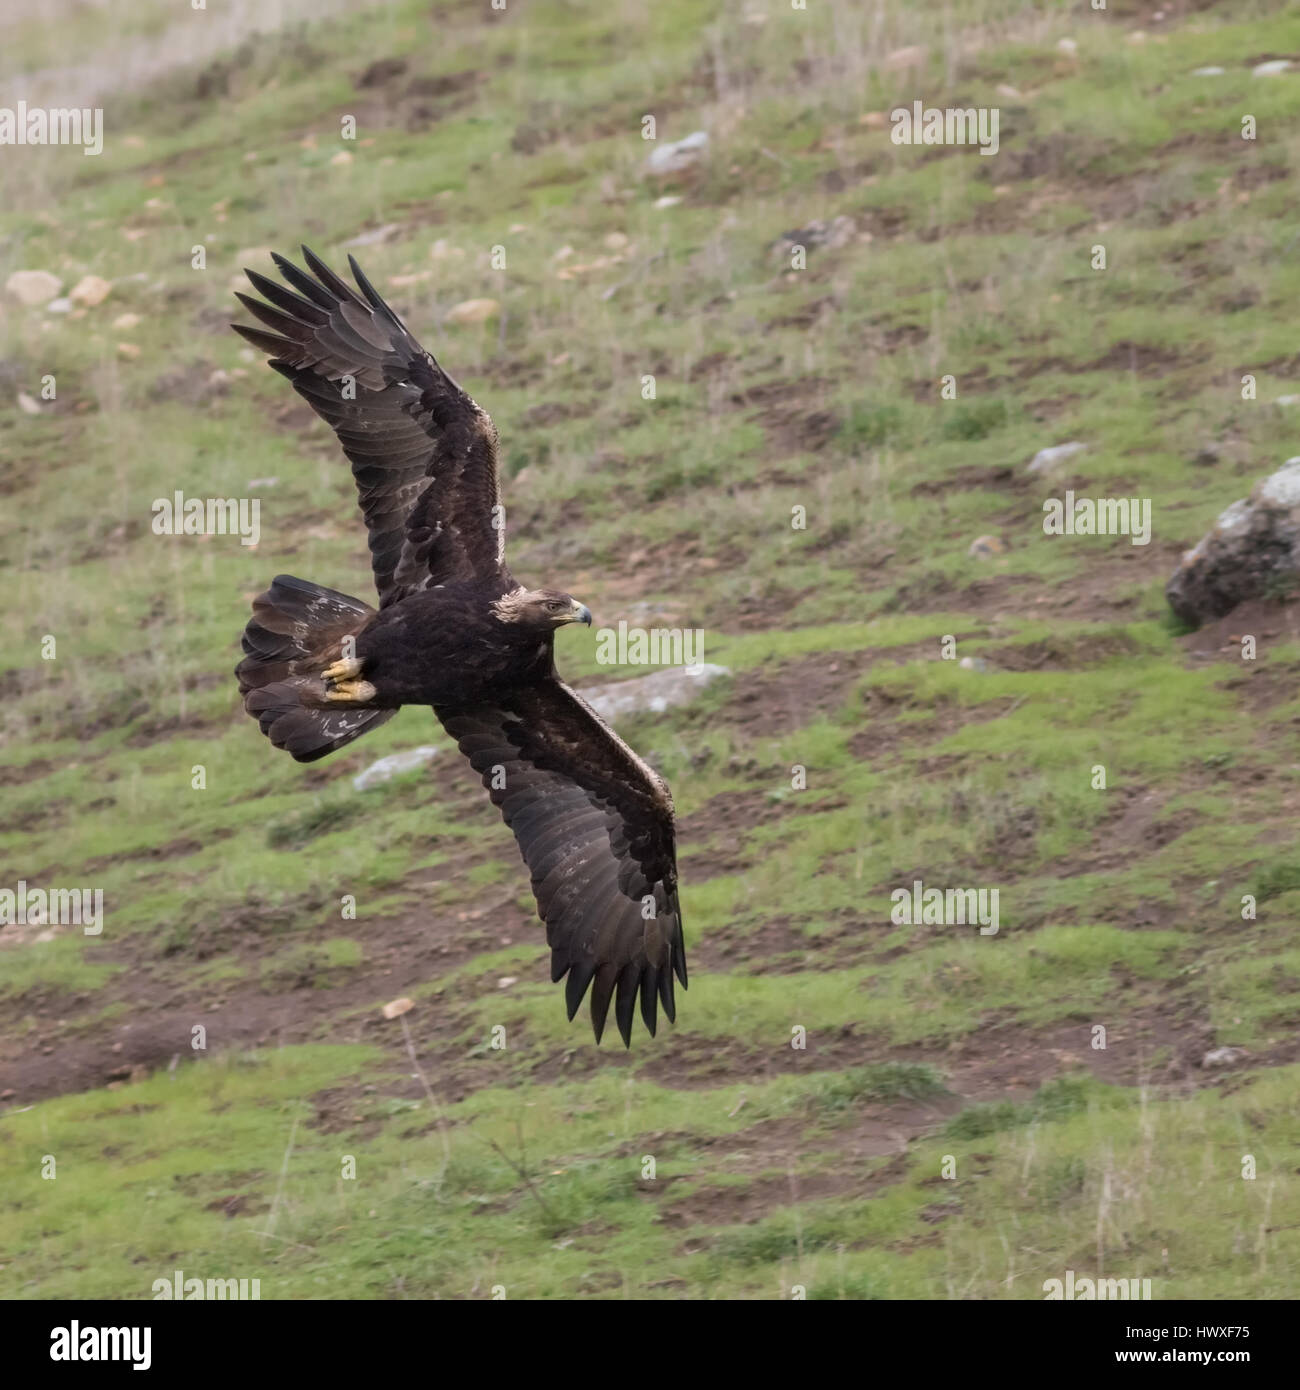 A stunning adult Golden Eagle makes a low, fast pass on a hillside, hoping to catch ground squirrels to feed its family as nesting season begins. Stock Photo